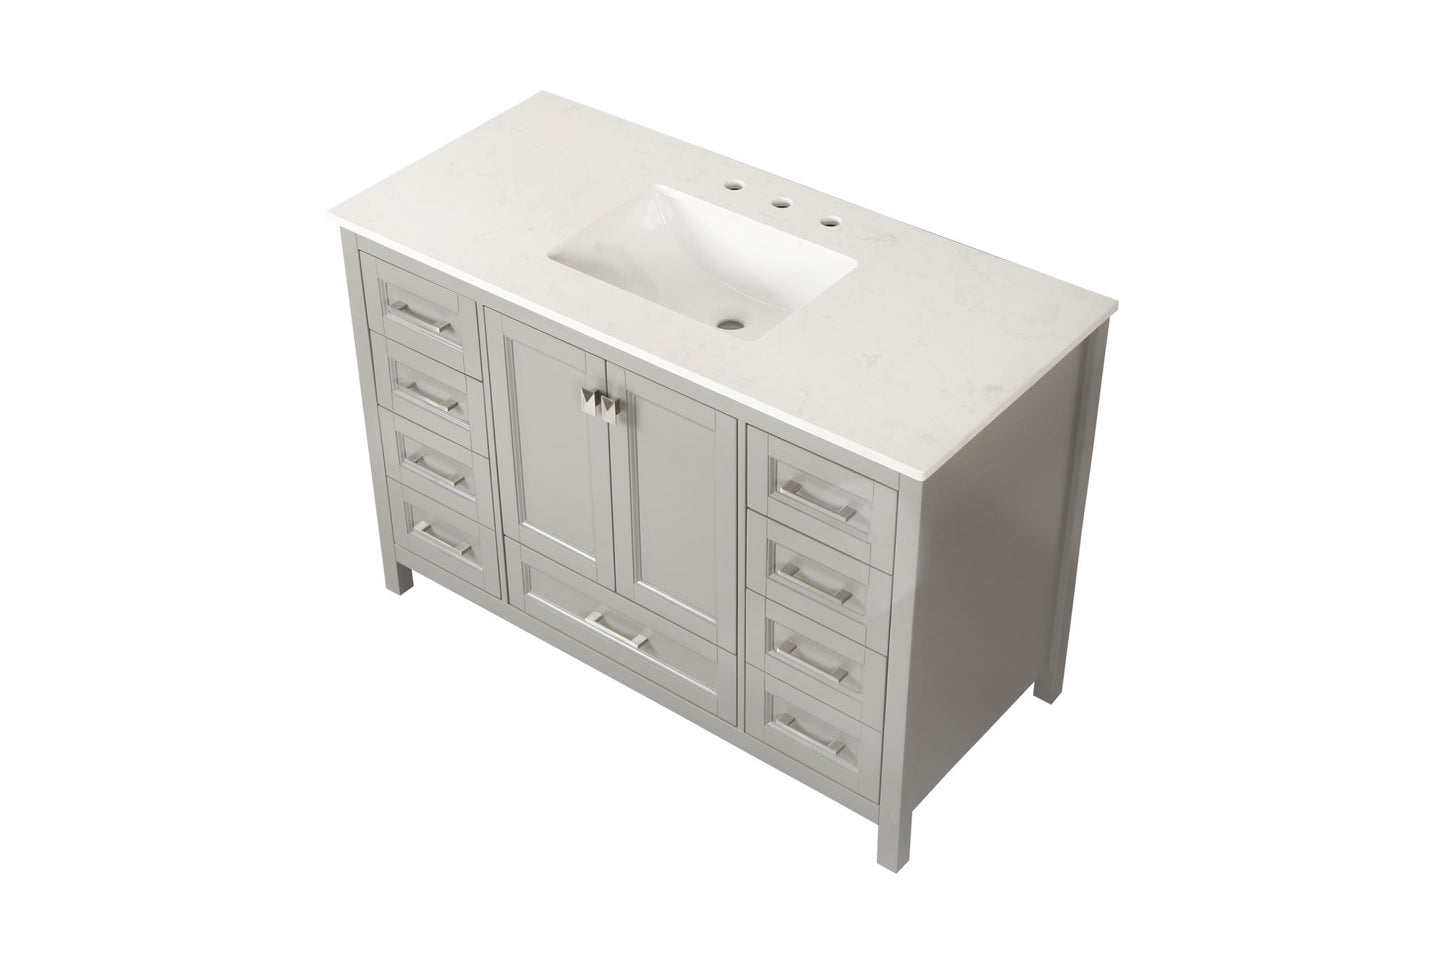 Vanity Sink Combo featuring a Marble Countertop, Bathroom Sink Cabinet, and Home Decor Bathroom Vanities - Fully Assembled Grey 48-inch Vanity with Sink 23V03-48GR